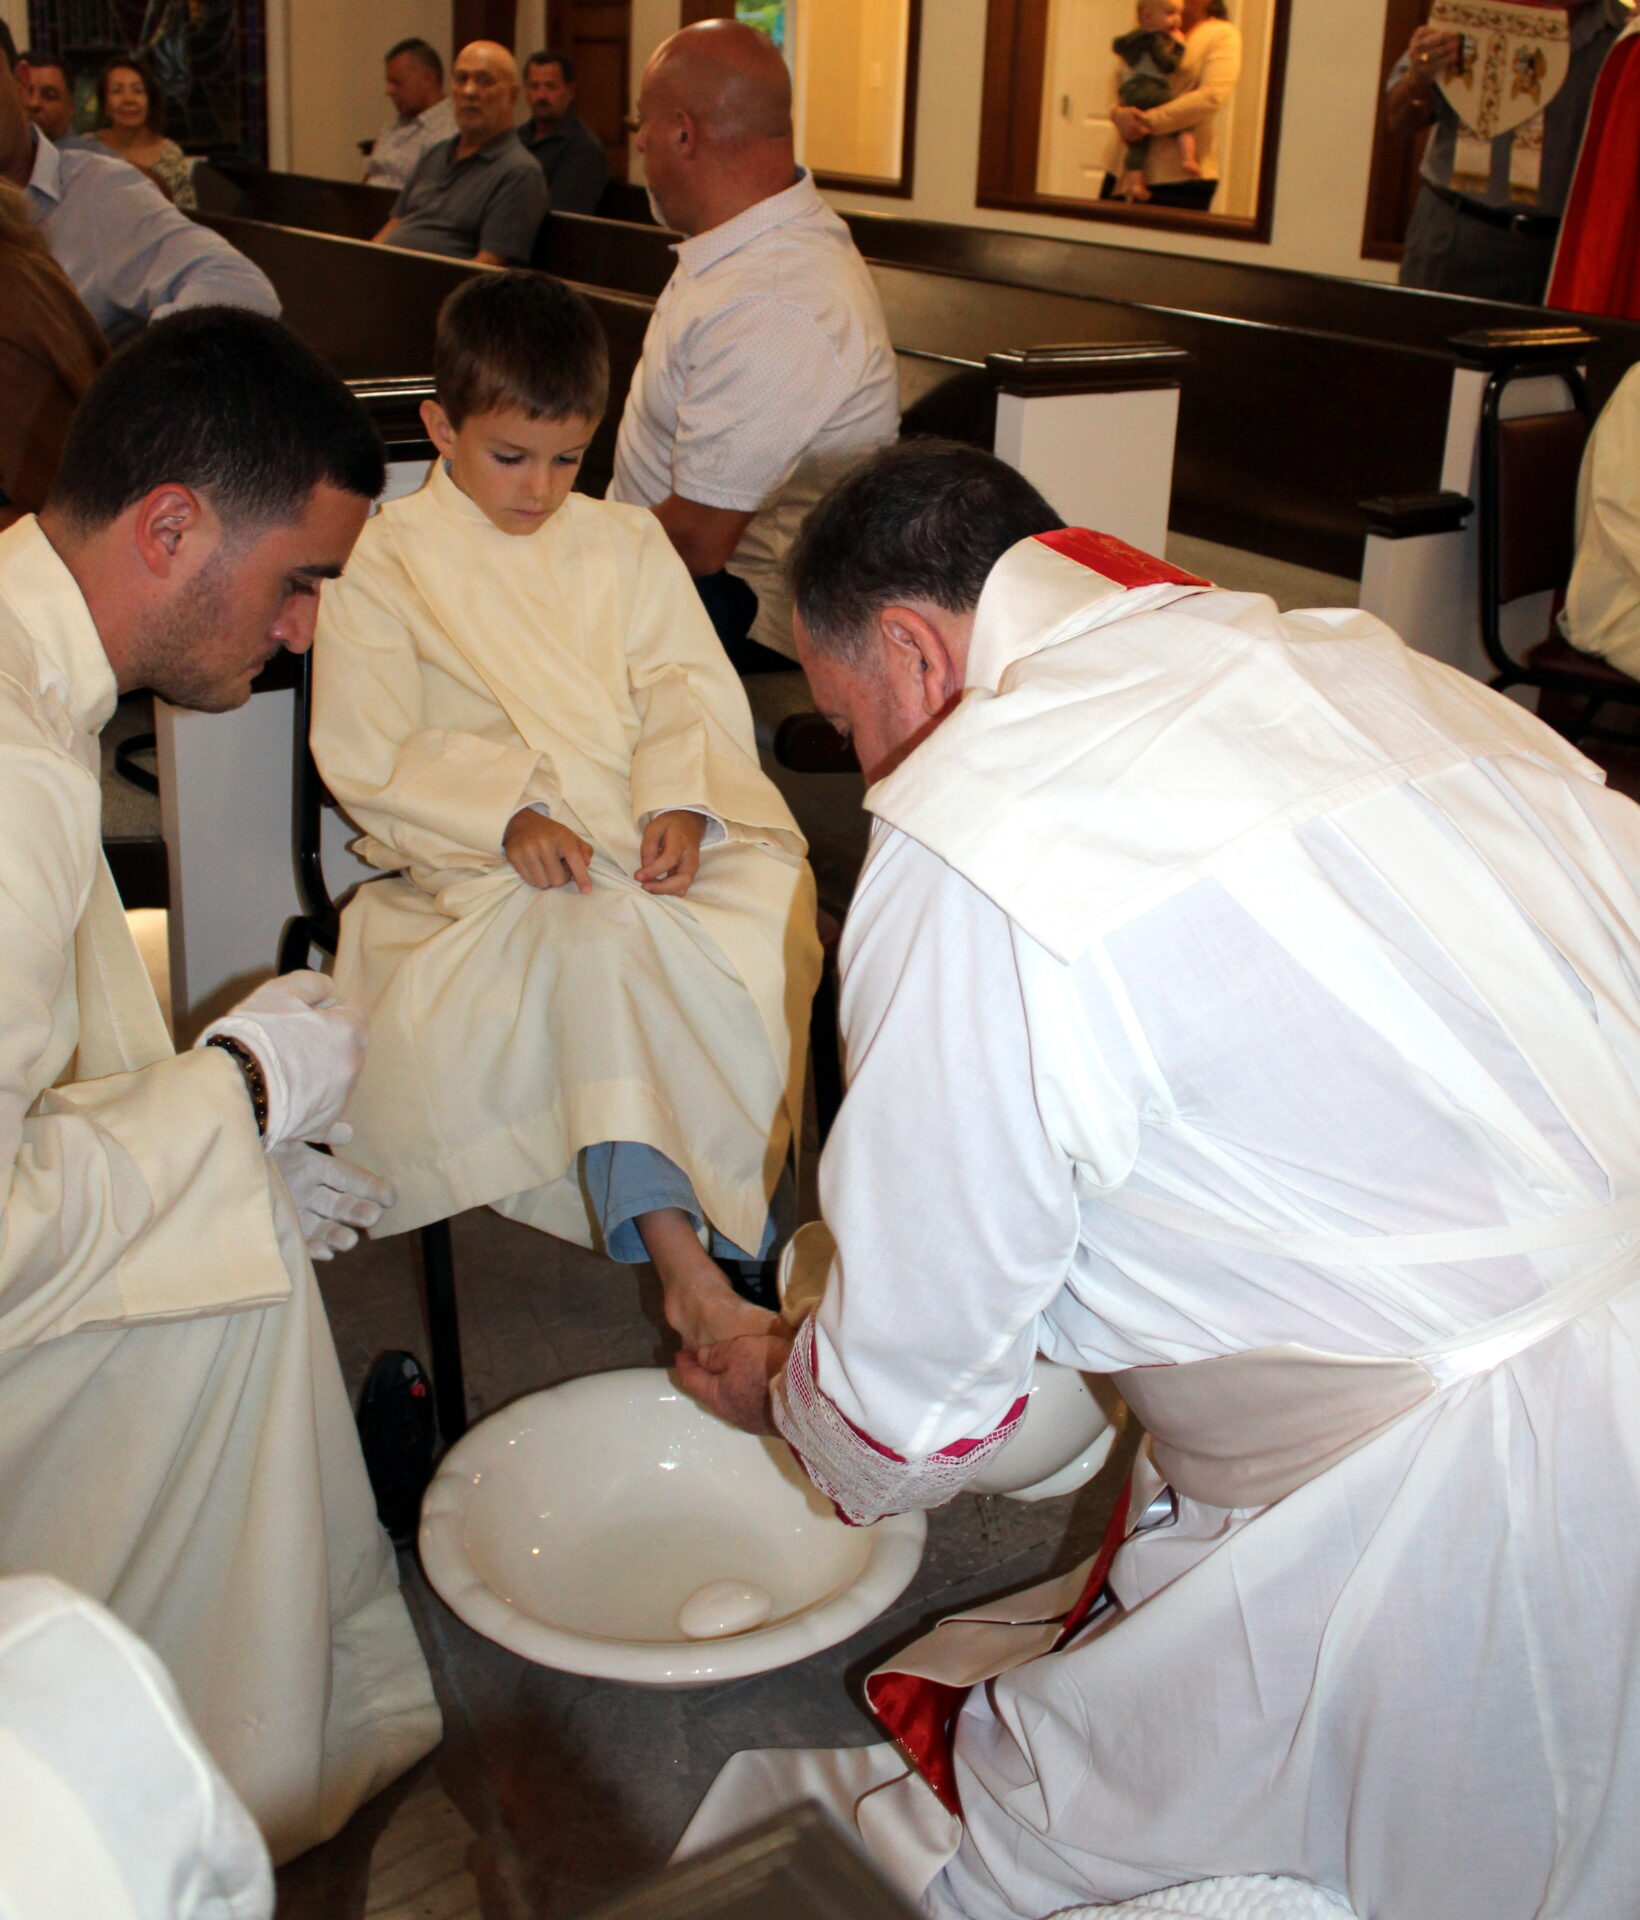 A priest washing a young sacristan’s feet beside another sacristan who’s wearing white gloves